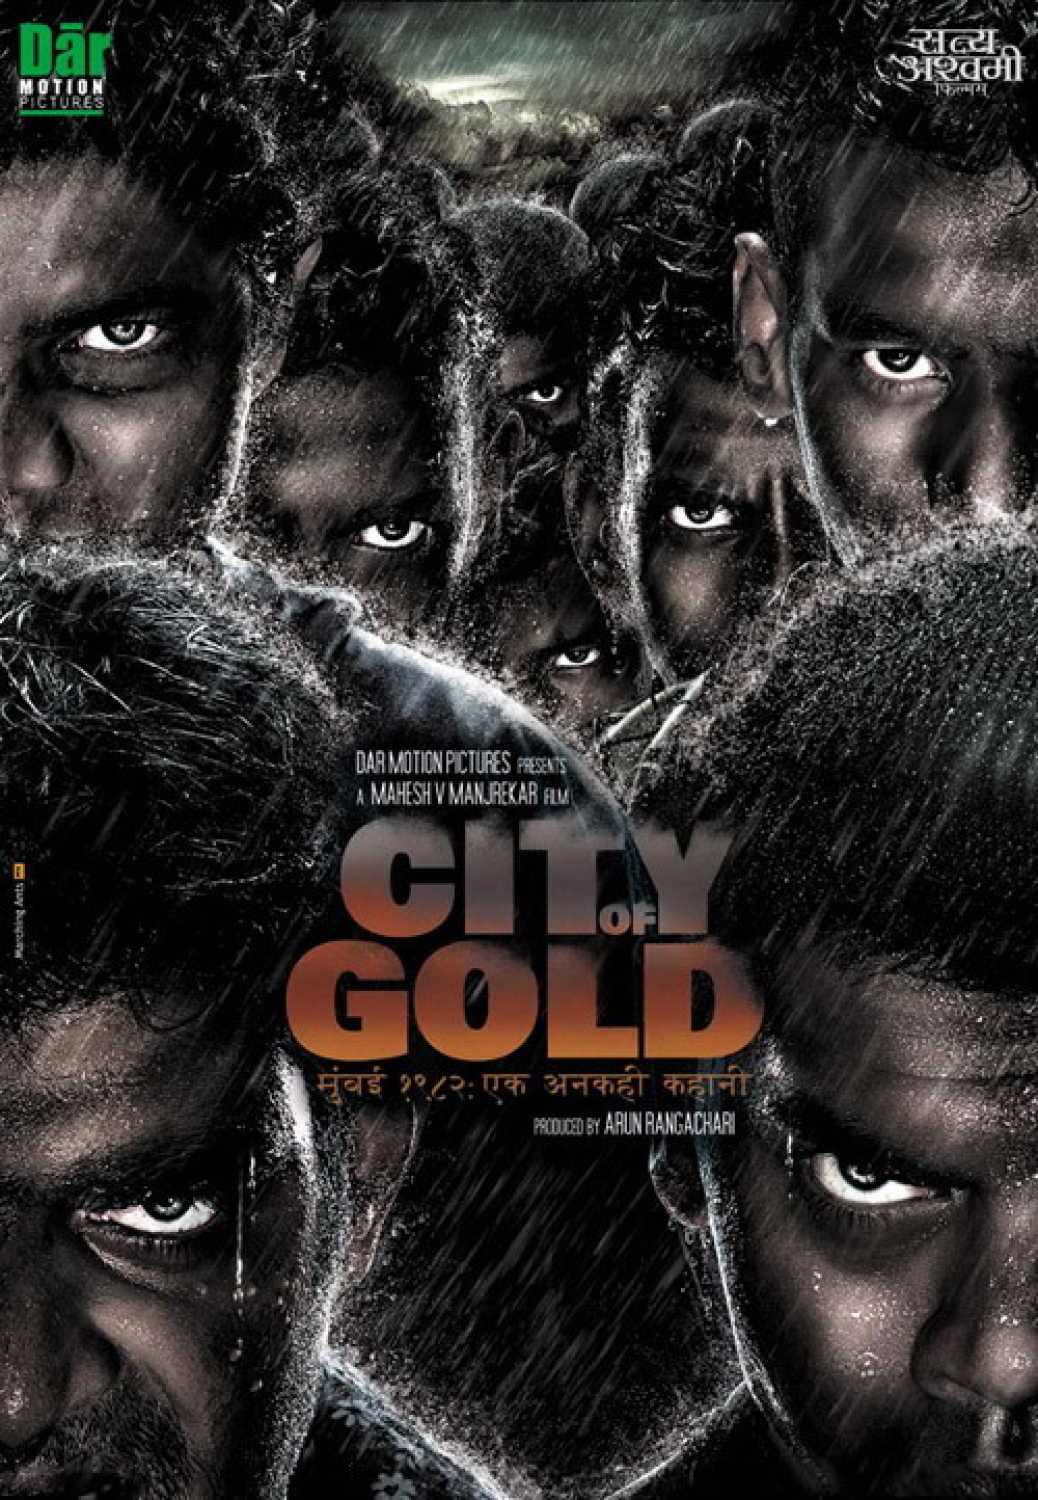 city of gold movie review